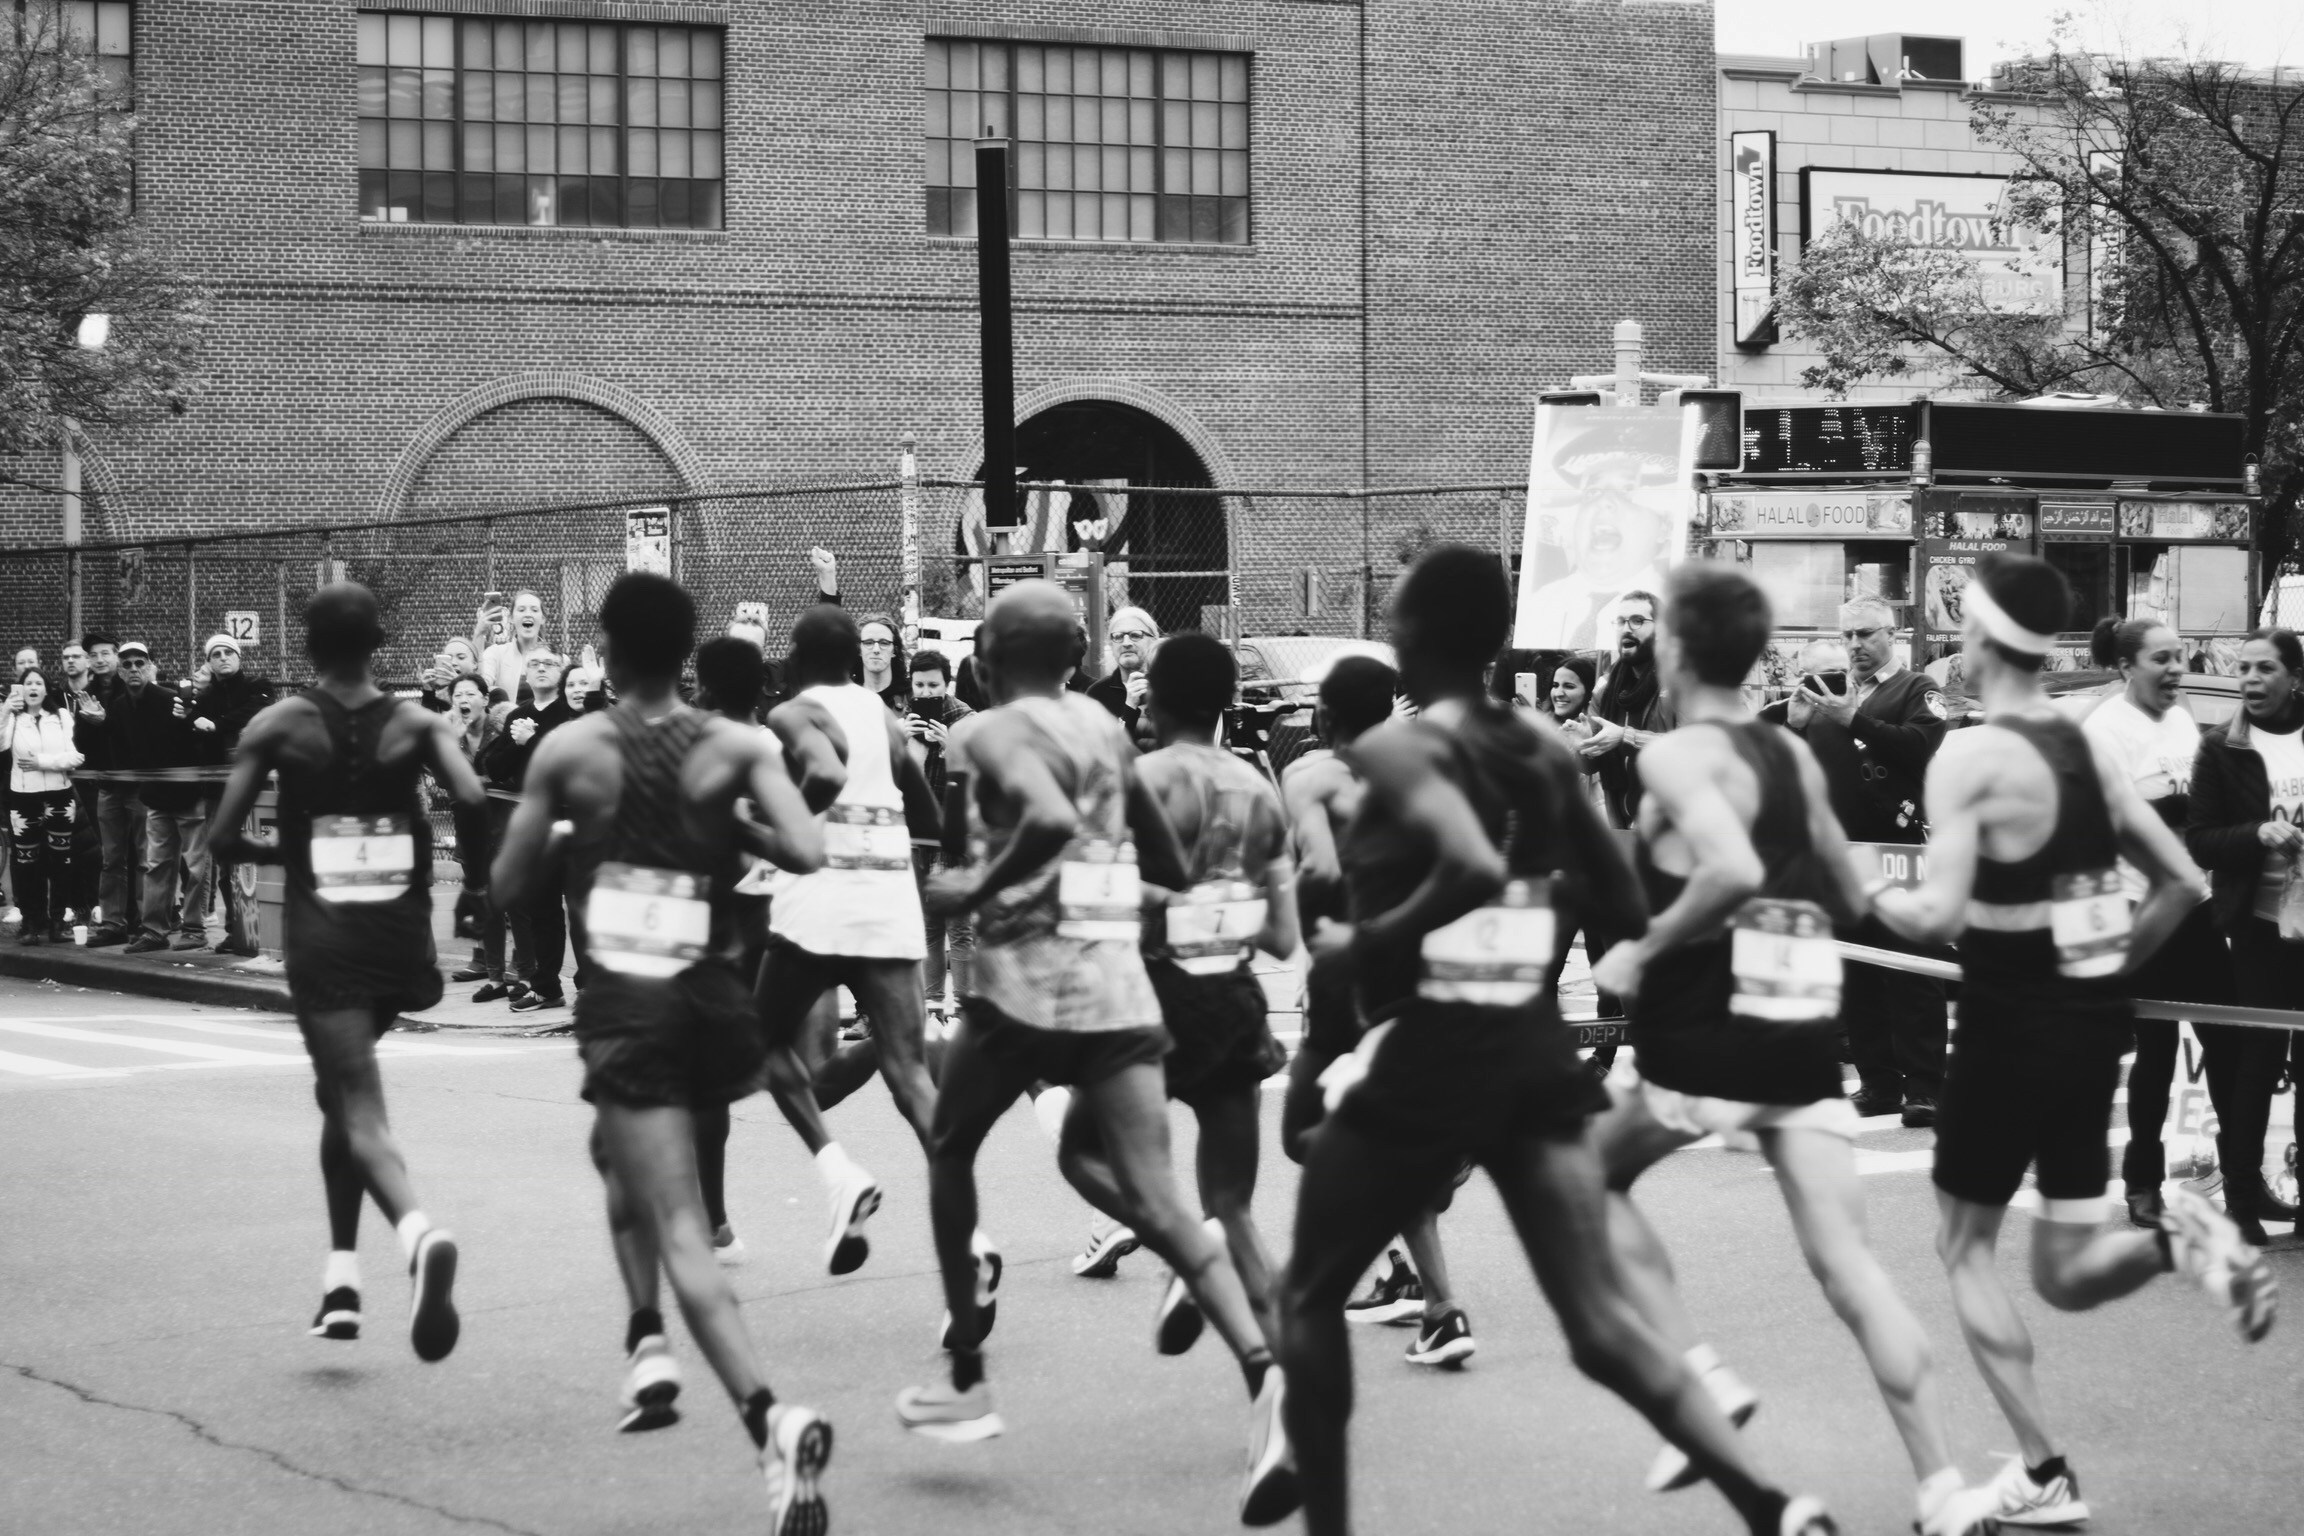 background image of runners in a 5k road race